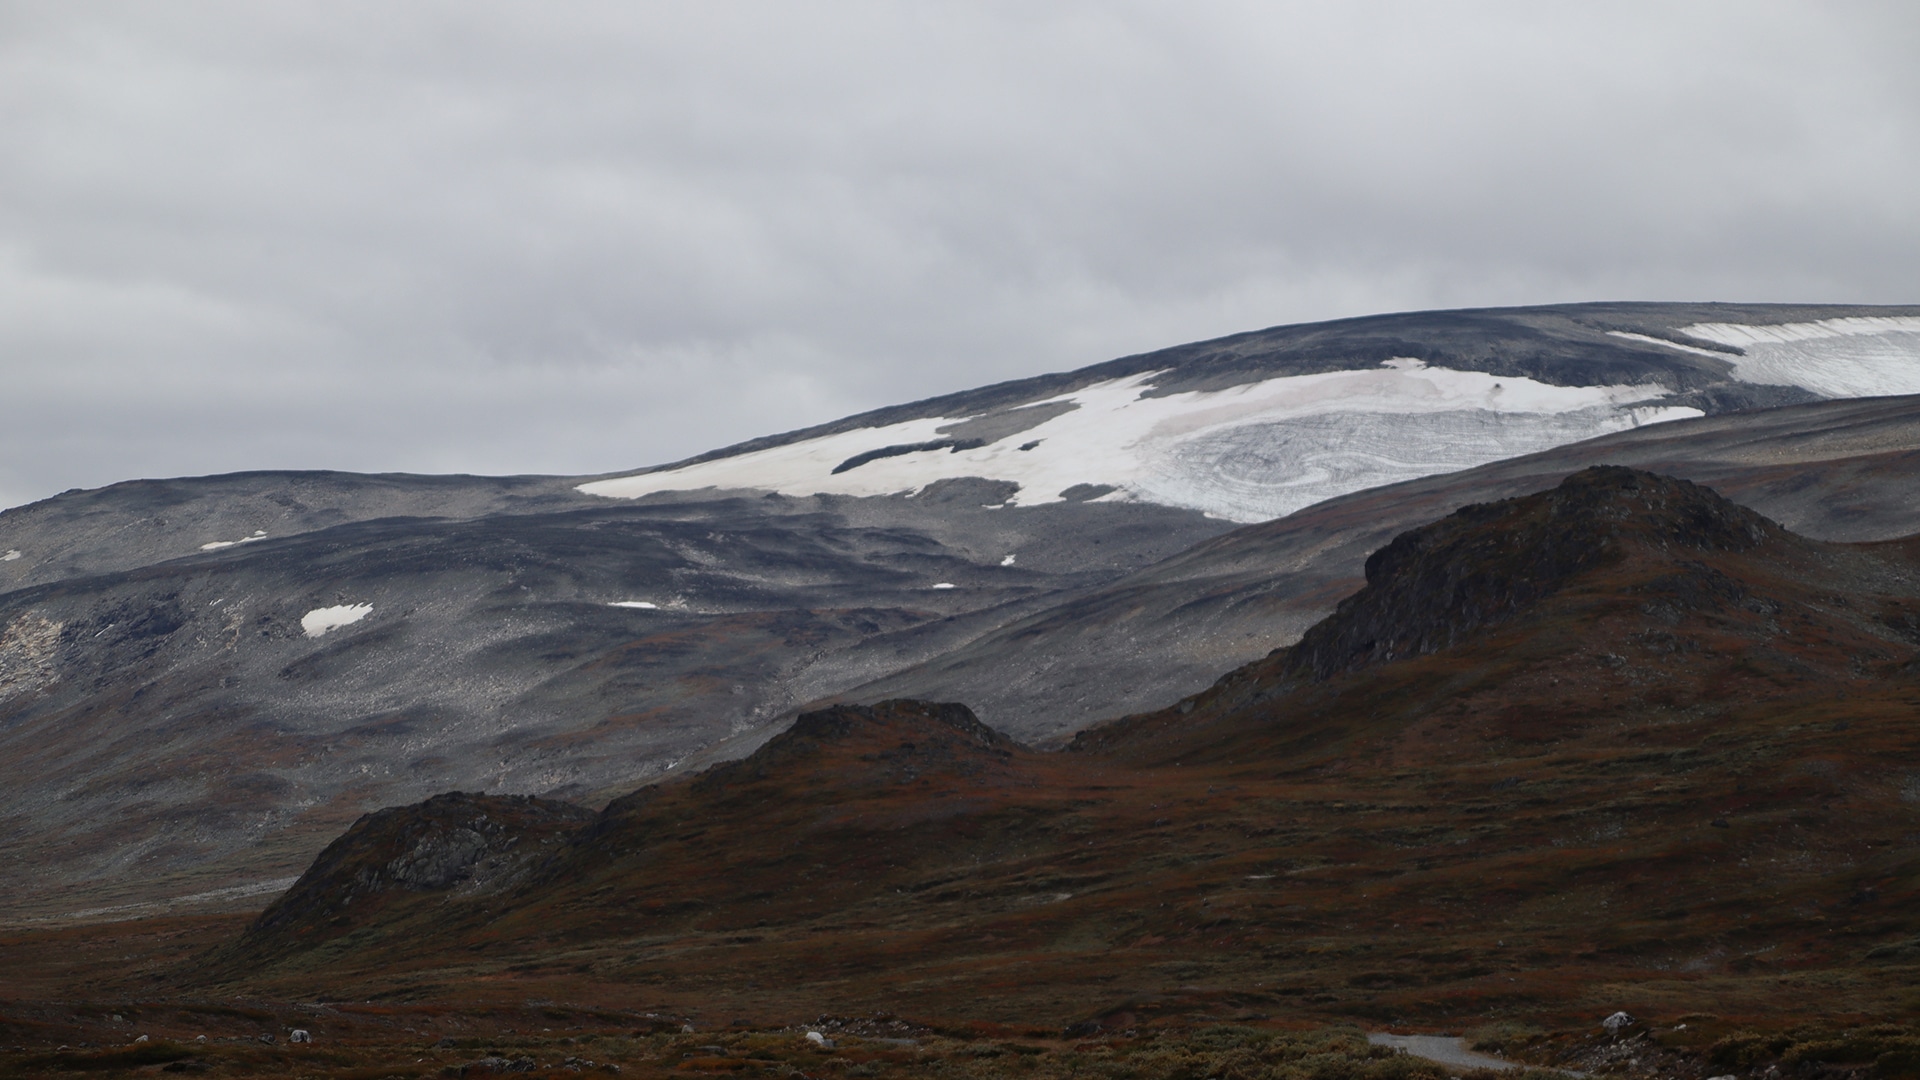 The view of Jotunheimen on a cloudy day.